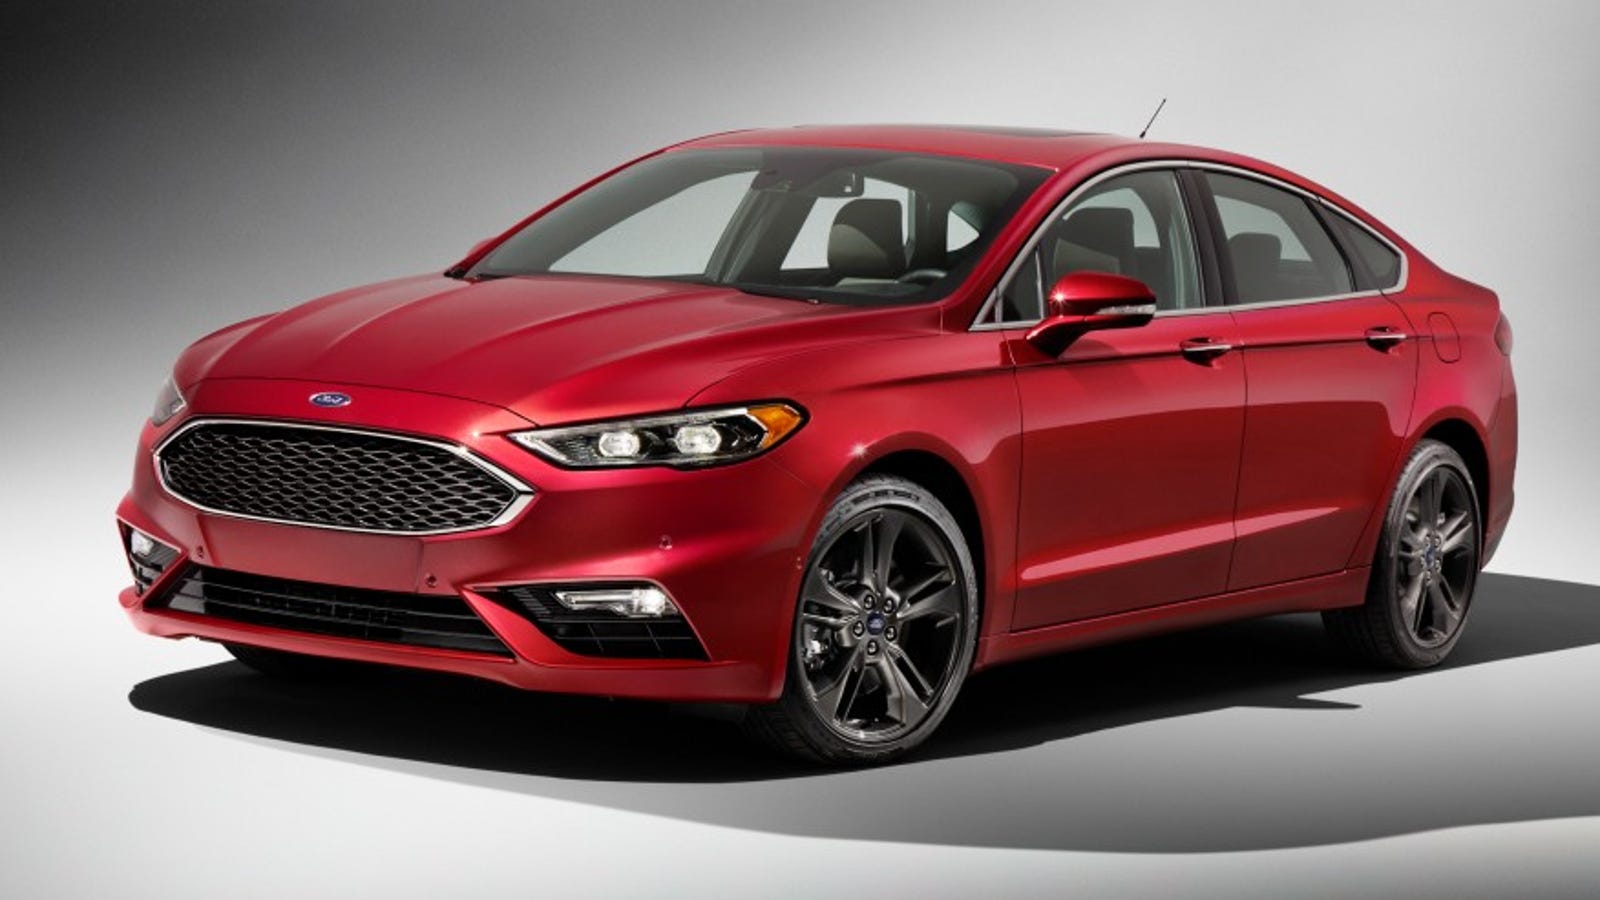 the-facelifted-2017-ford-fusion-gets-sporty-with-a-325-hp-twin-turbo-v6